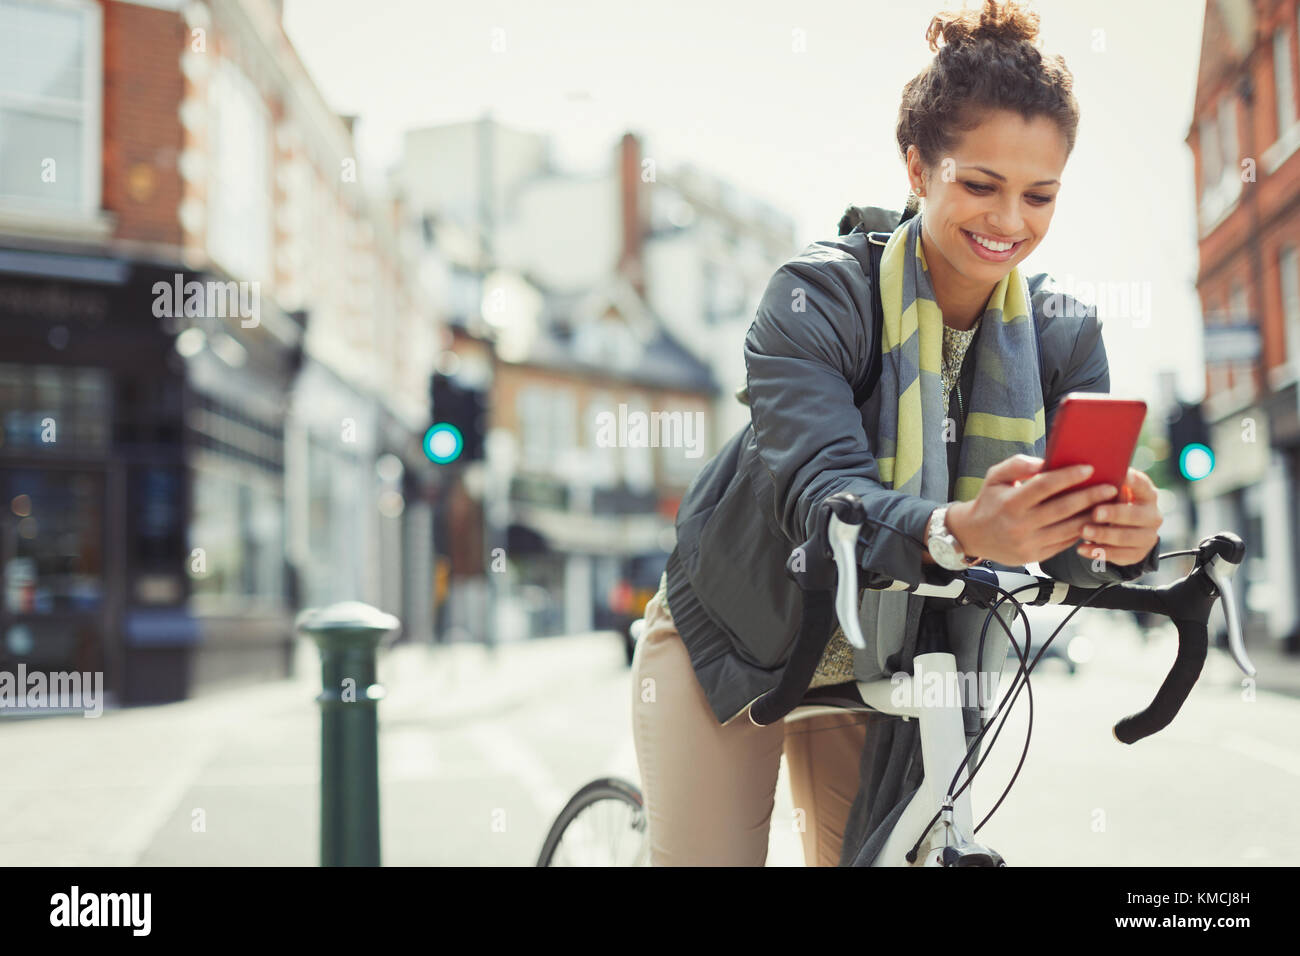 Smiling young woman commuting with bicycle, texting with cell phone on sunny urban street Stock Photo